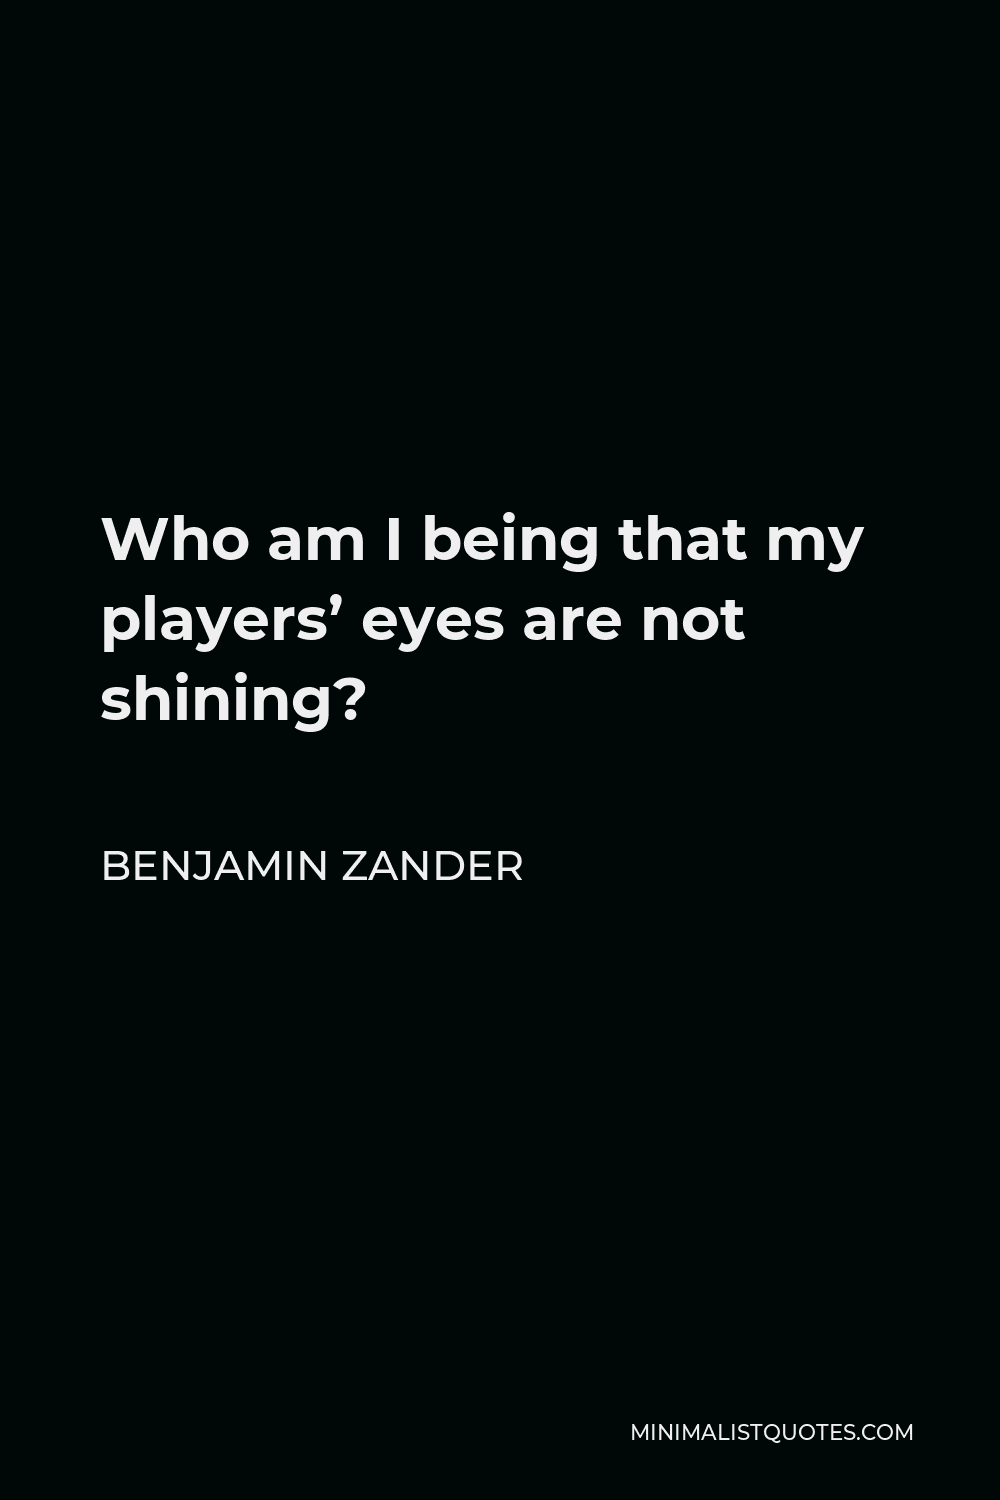 Benjamin Zander Quote - Who am I being that my players’ eyes are not shining?